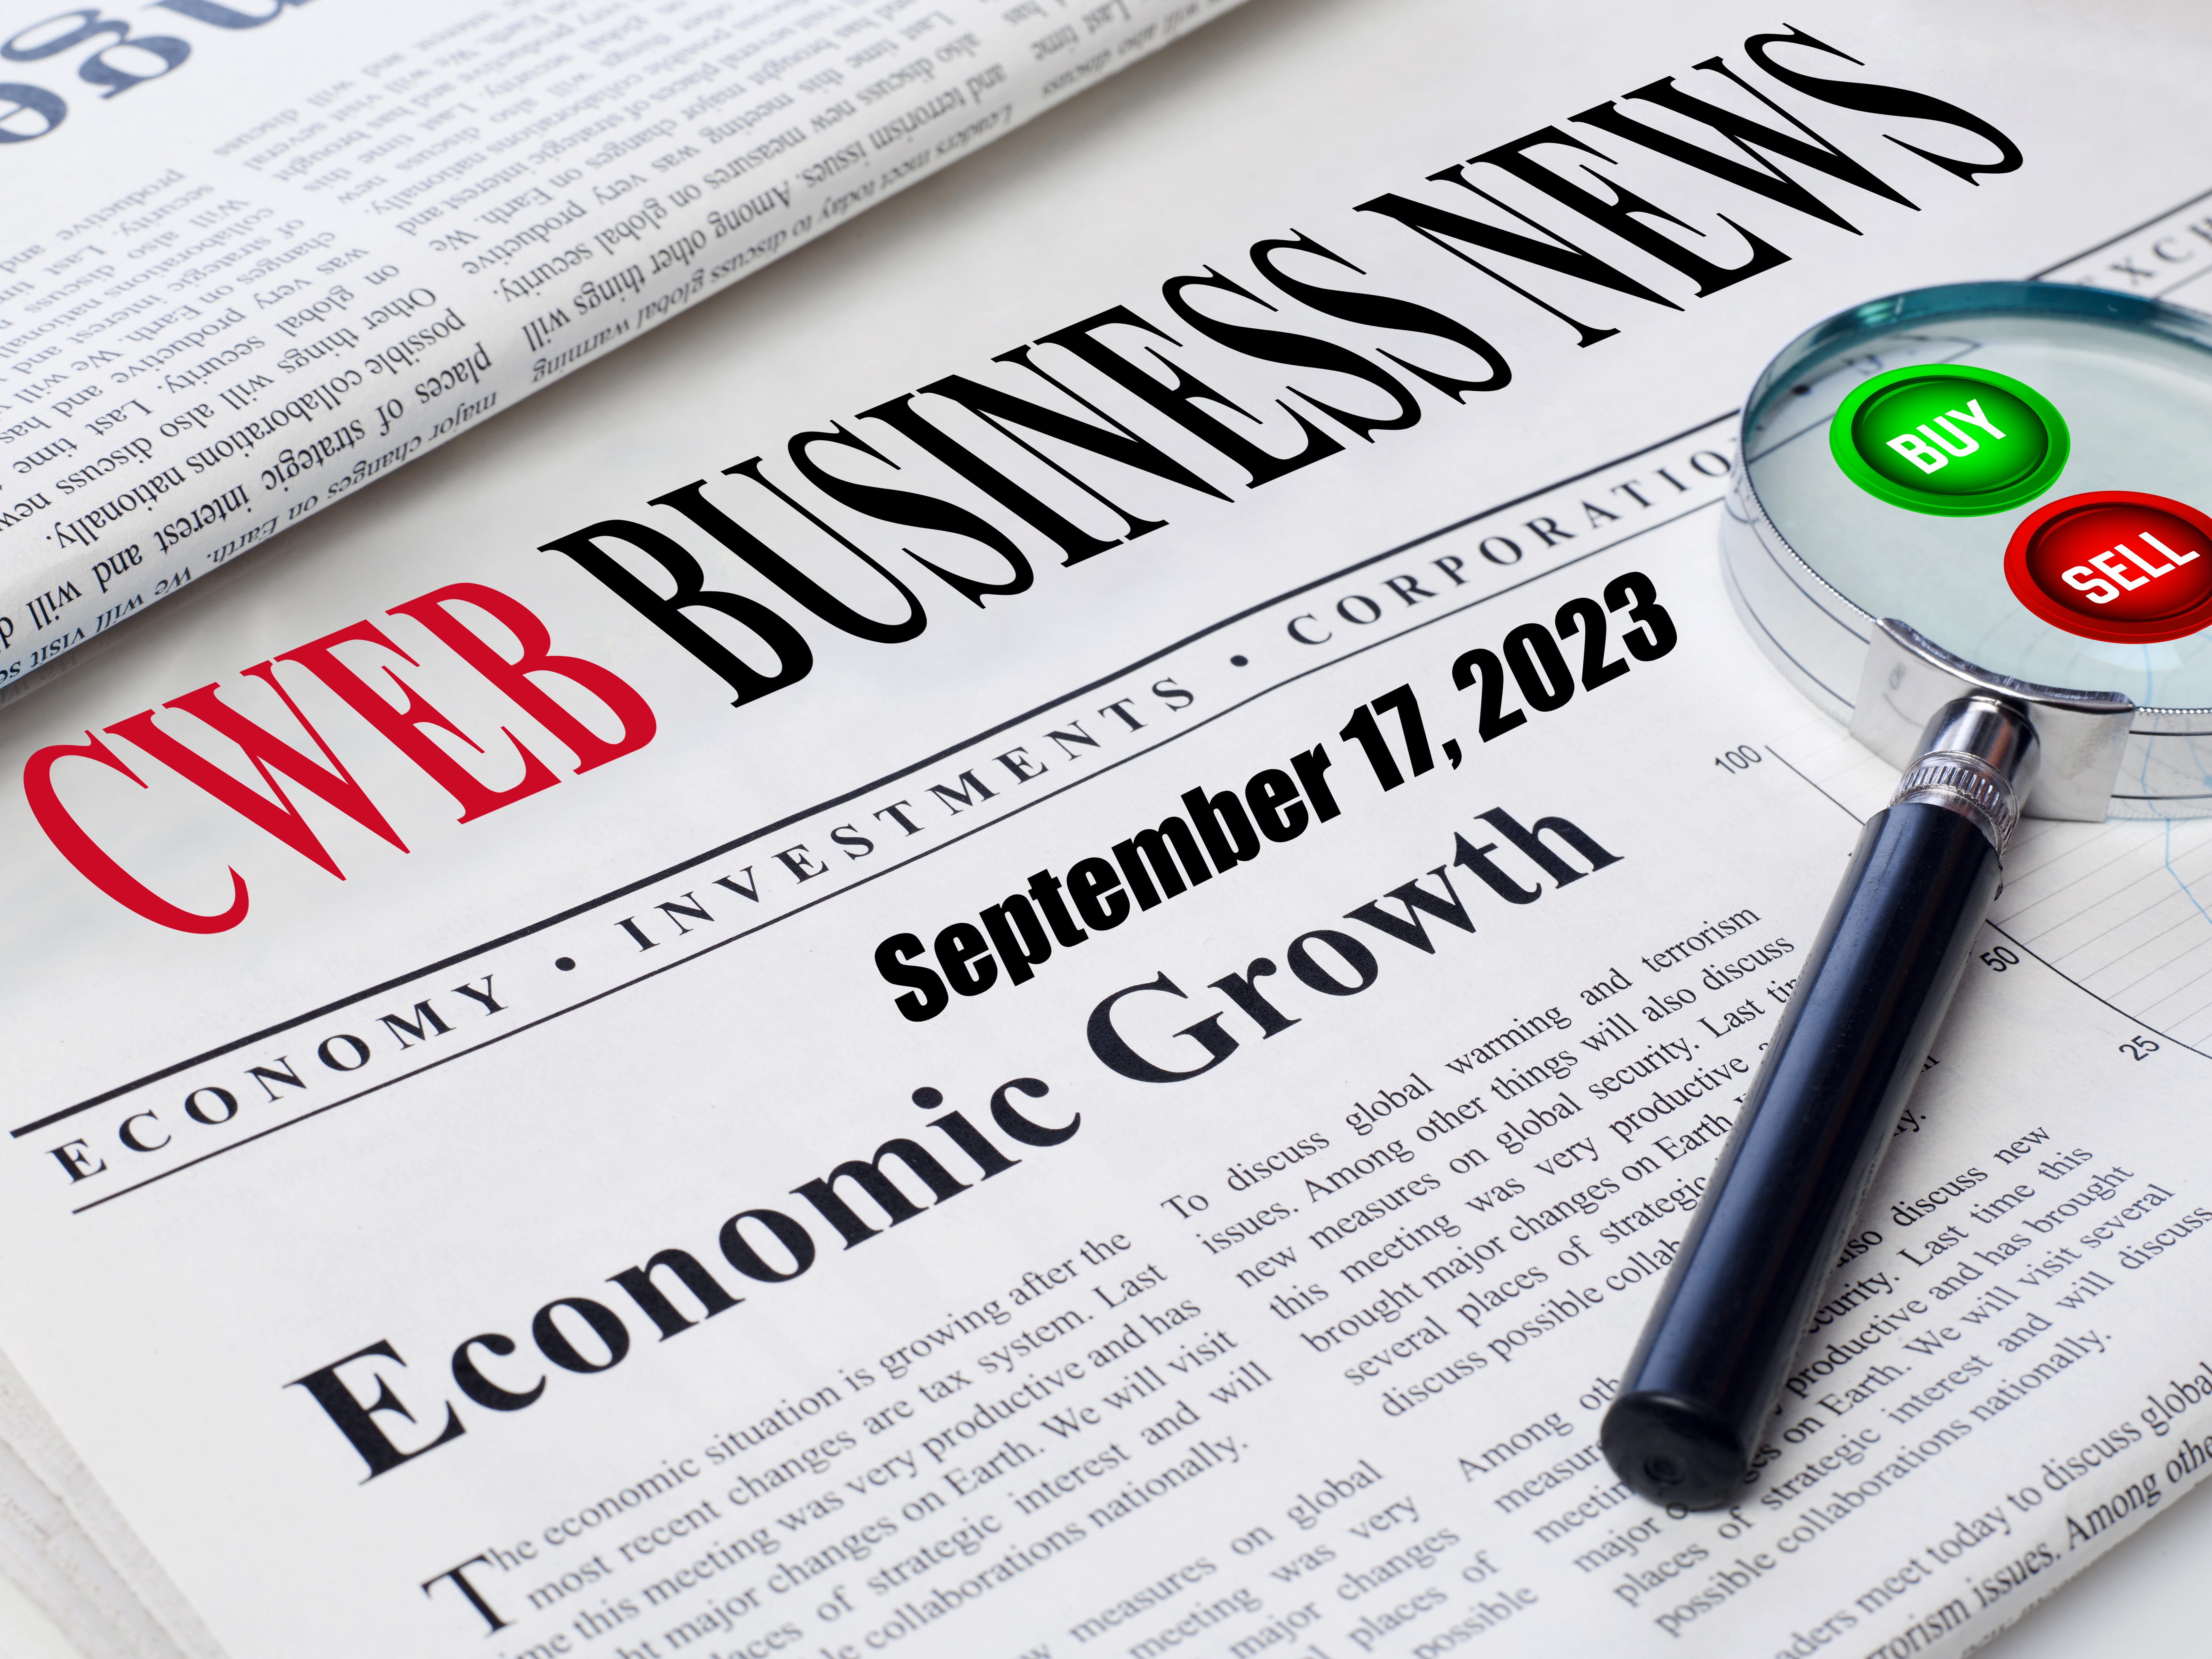 CWEB Publishes Roundup of Business and Trending News Highlights that Matter the Most - October 13, 2023